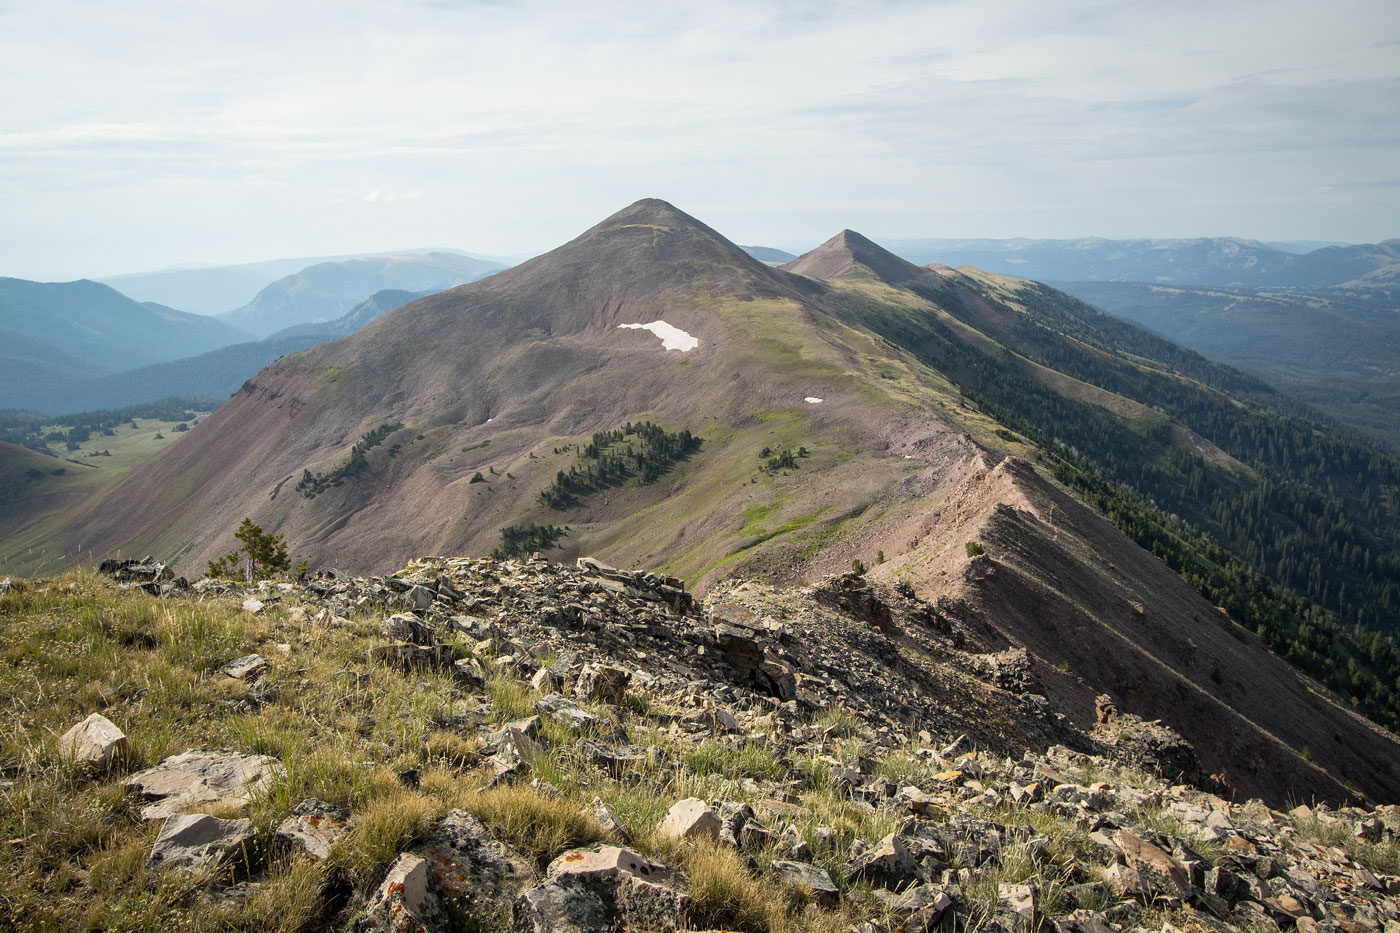 Hike Wyoming Peak and Mount Coffin in Bridger-Teton National Forest, Wyoming - Stav is Lost